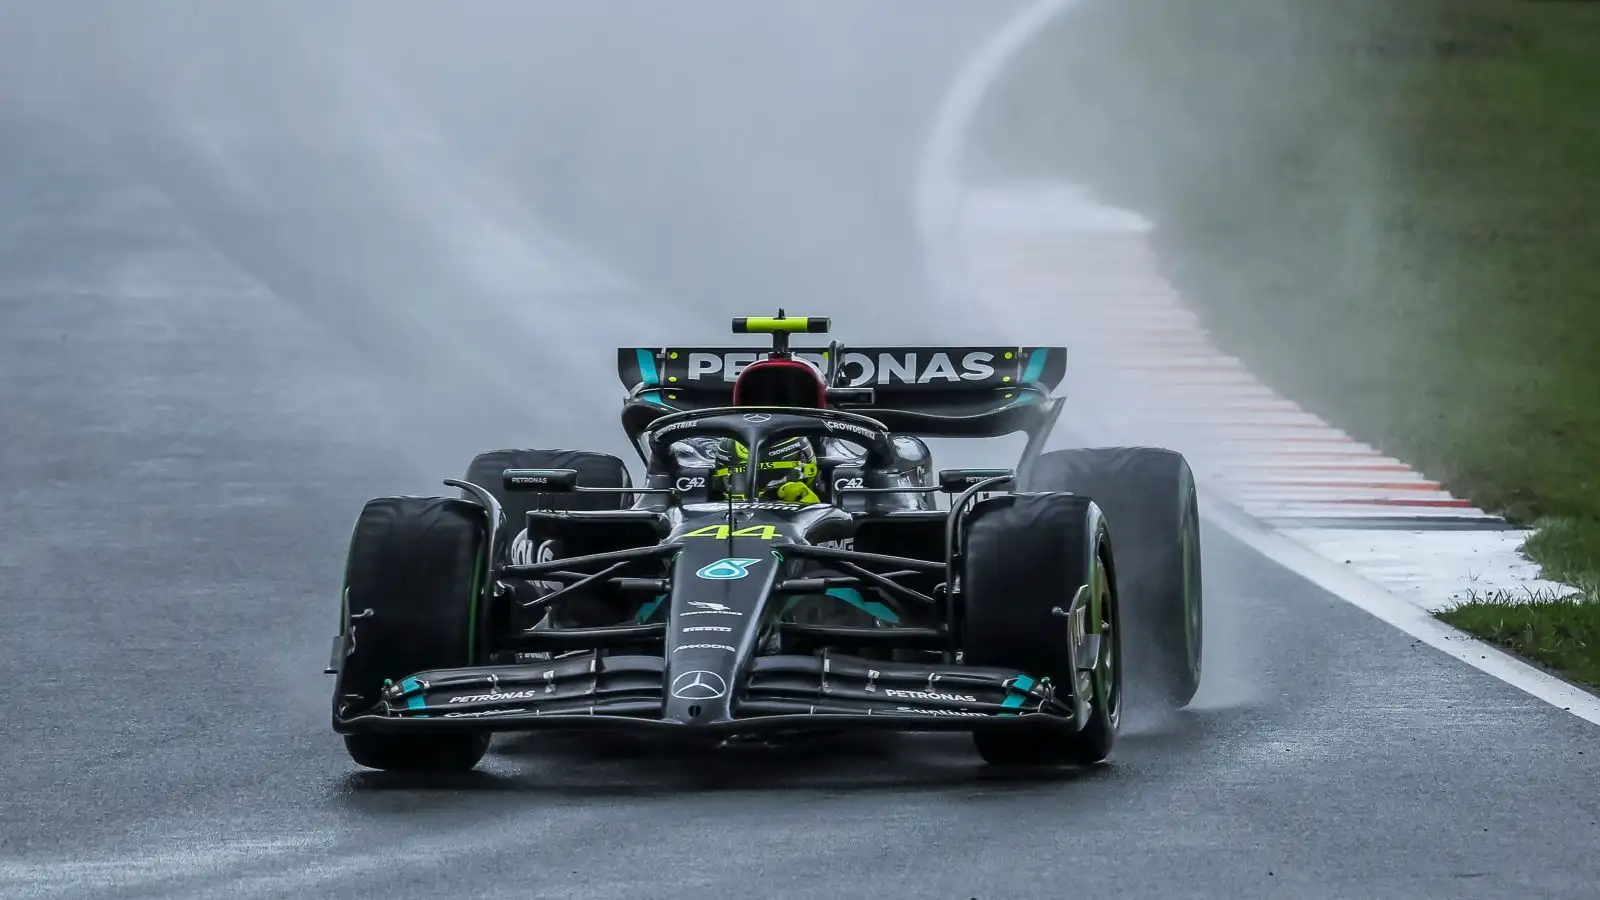 Lewis Hamilton (Mercedes) en route to a disappointing 13th in Dutch Grand Prix qualifying at Zandvoort.